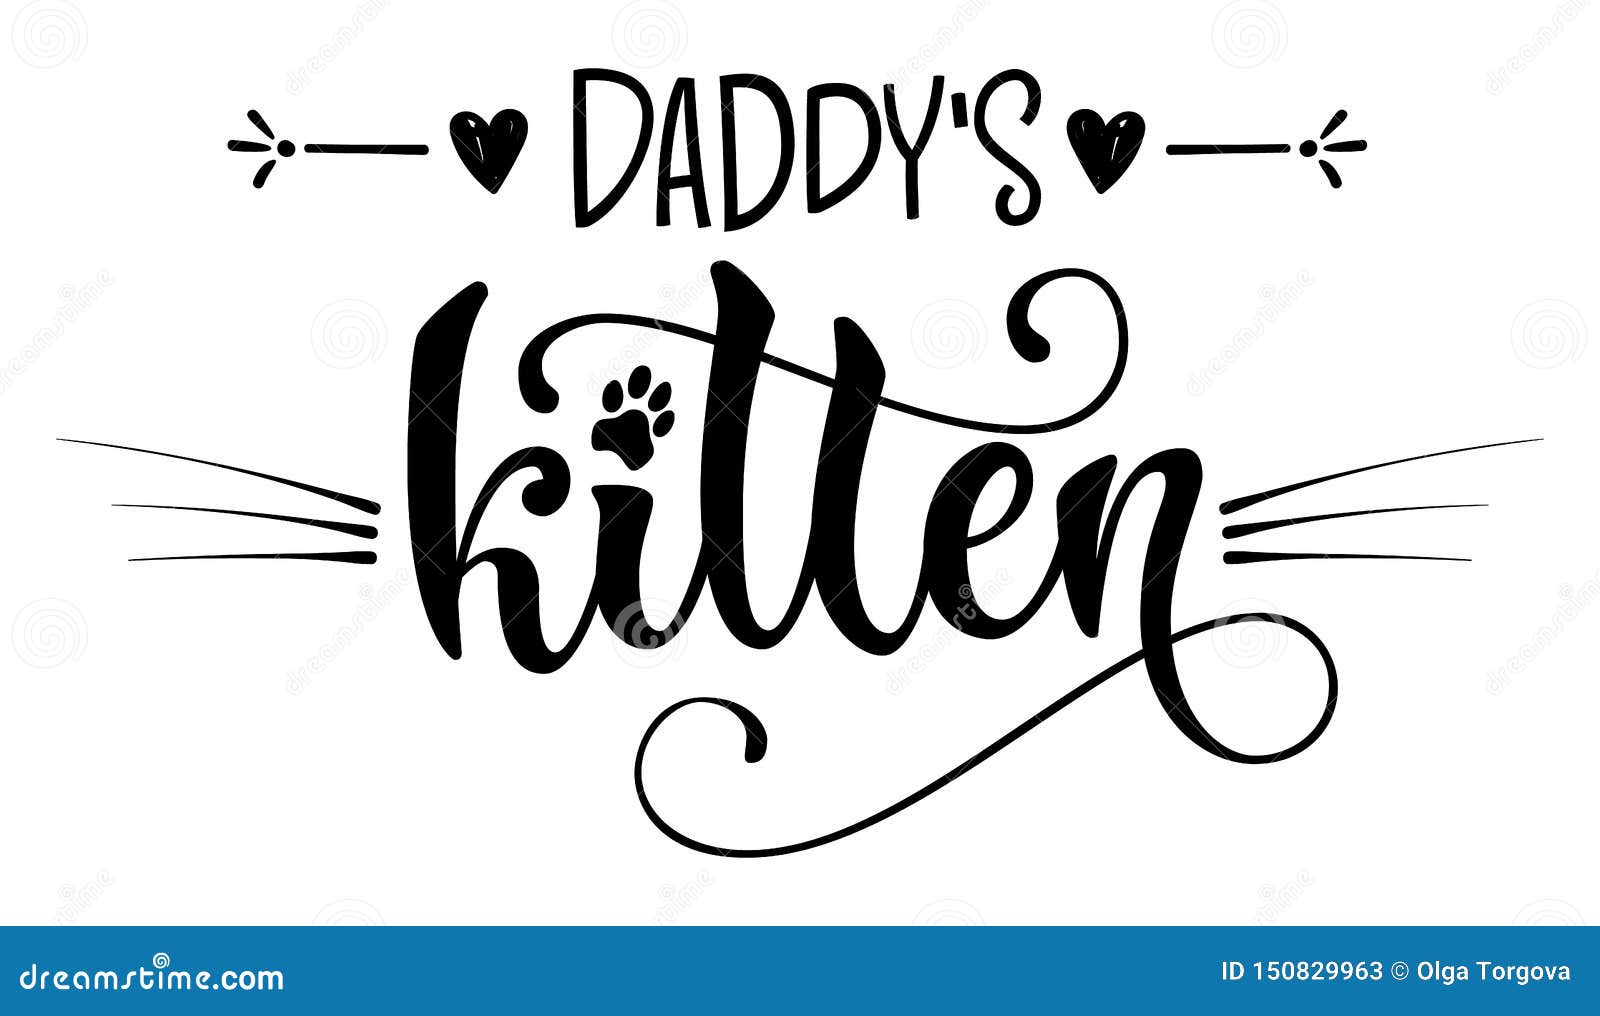 Daddy and kitten